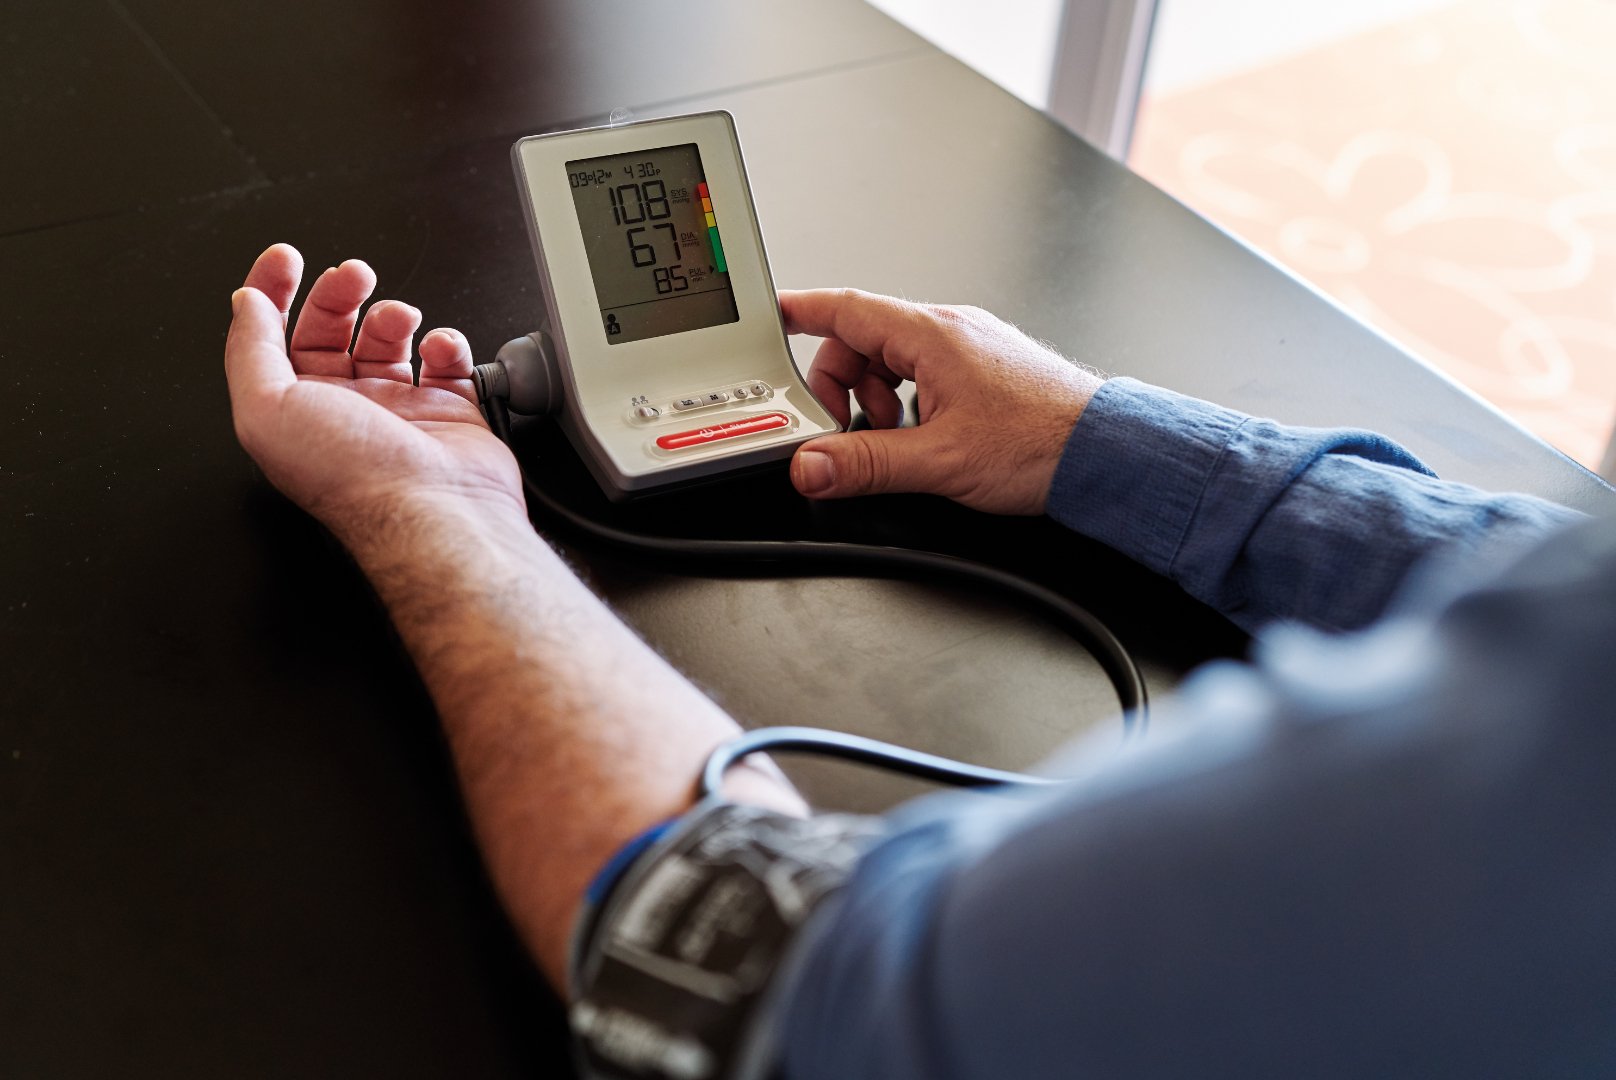 How to Correctly Measure Blood Pressure - 120/Life